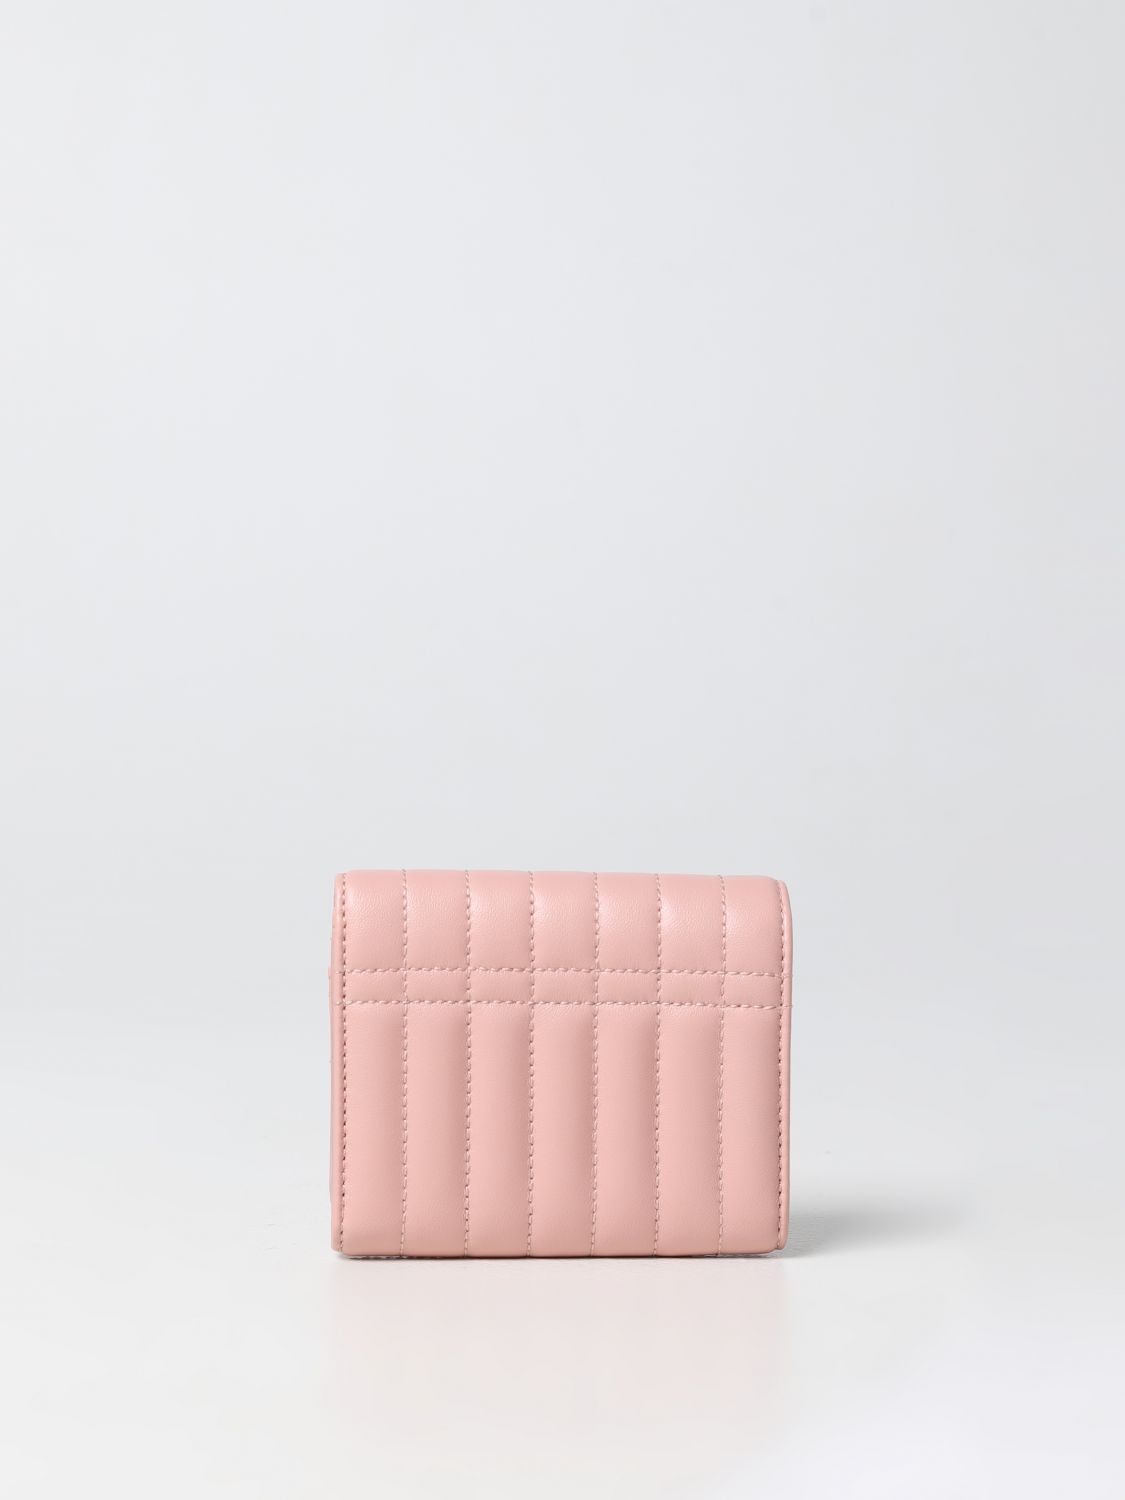 Burberry Lola - Wallet for Woman - Pink - 8062369-A3361